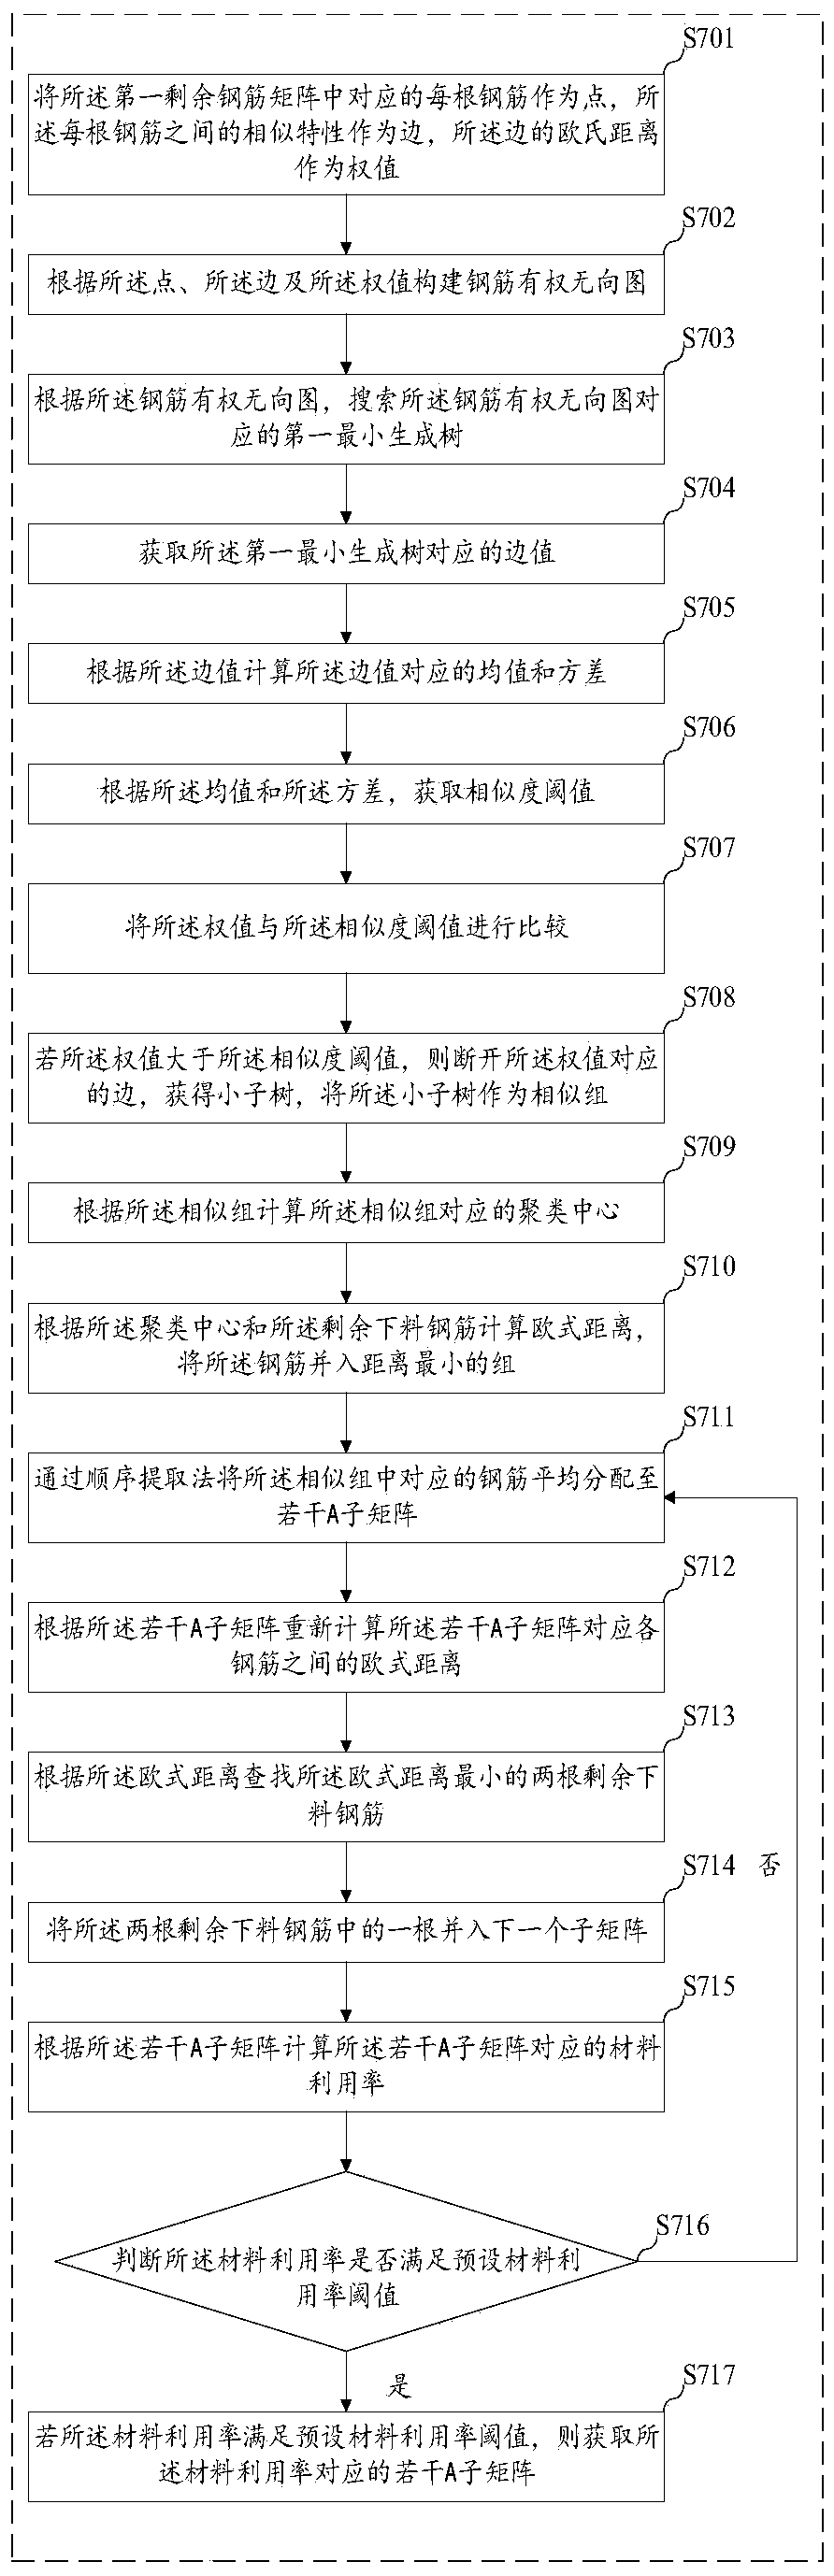 Large-scale steel bar grouping and blanking optimization method and device